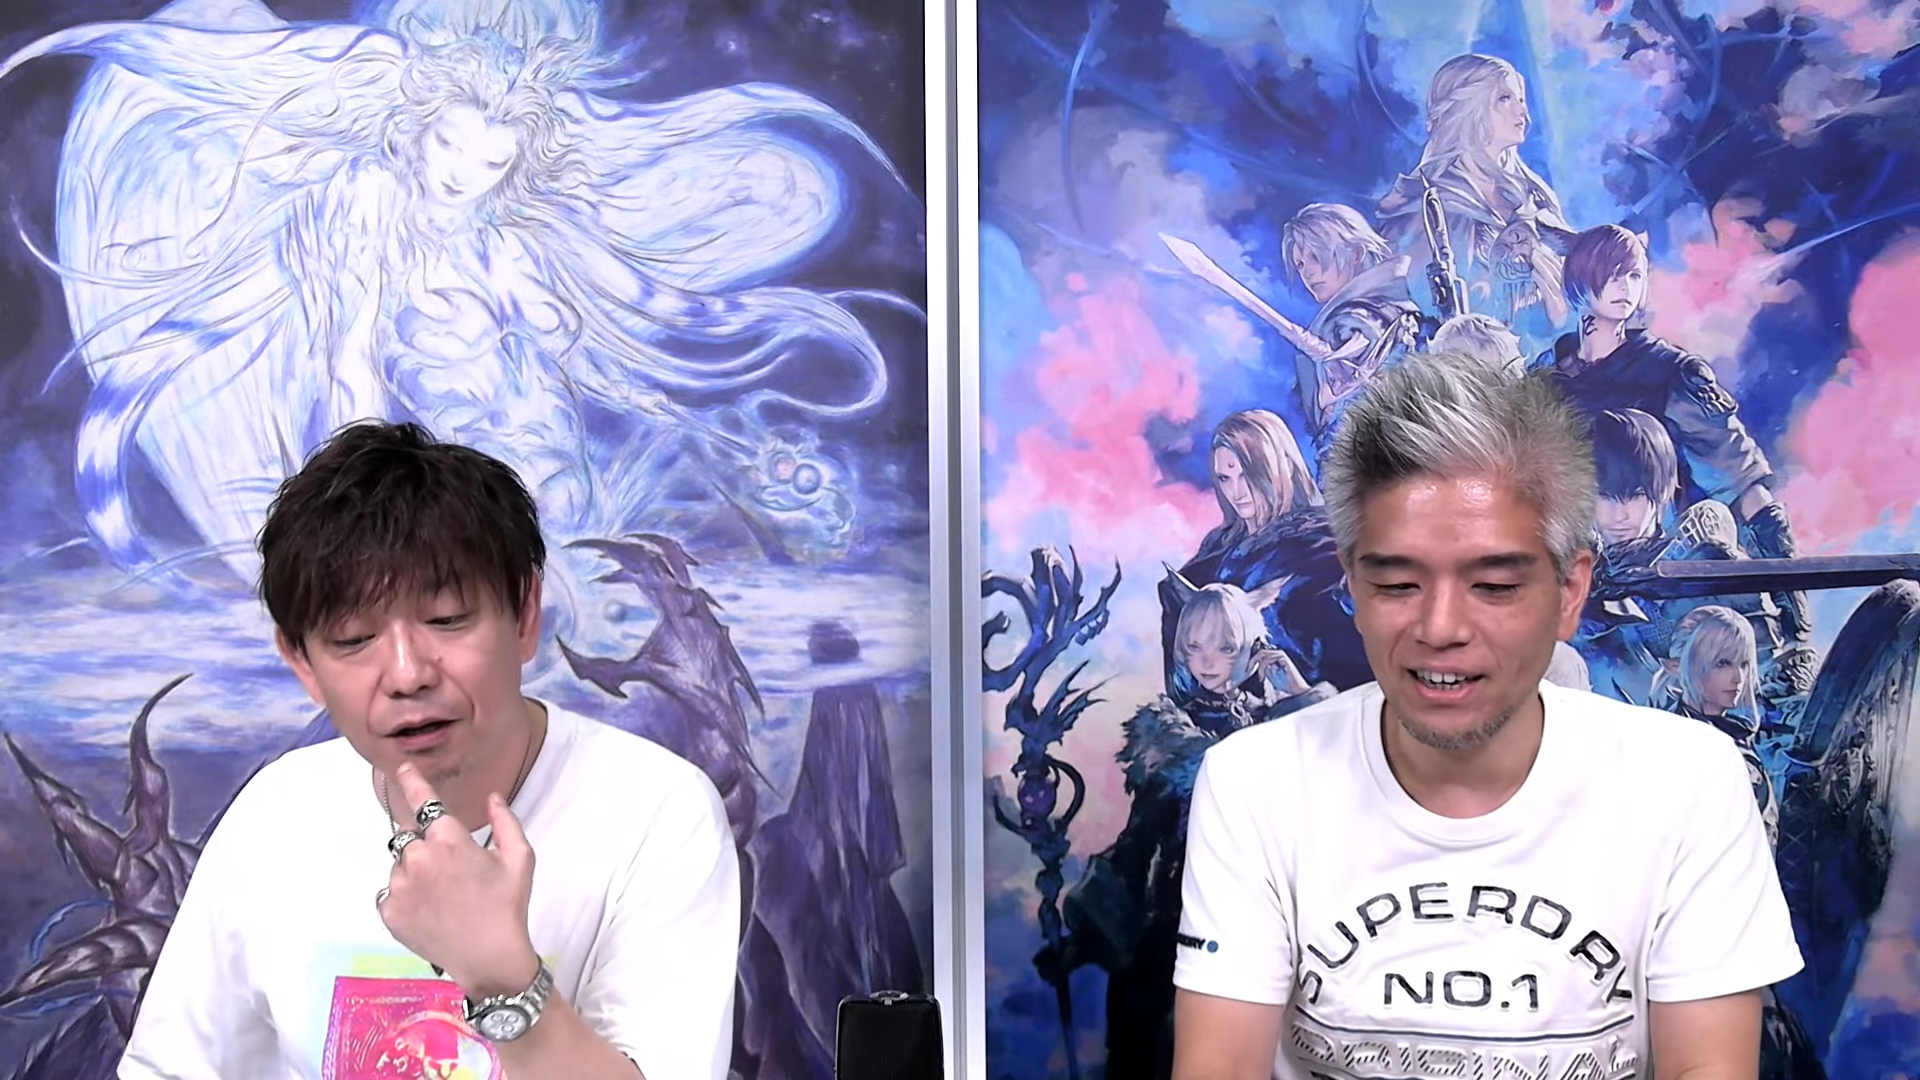 FFXIV producer/director Naoki Yoshida criticizes a Japanese internet service provider over connection issues